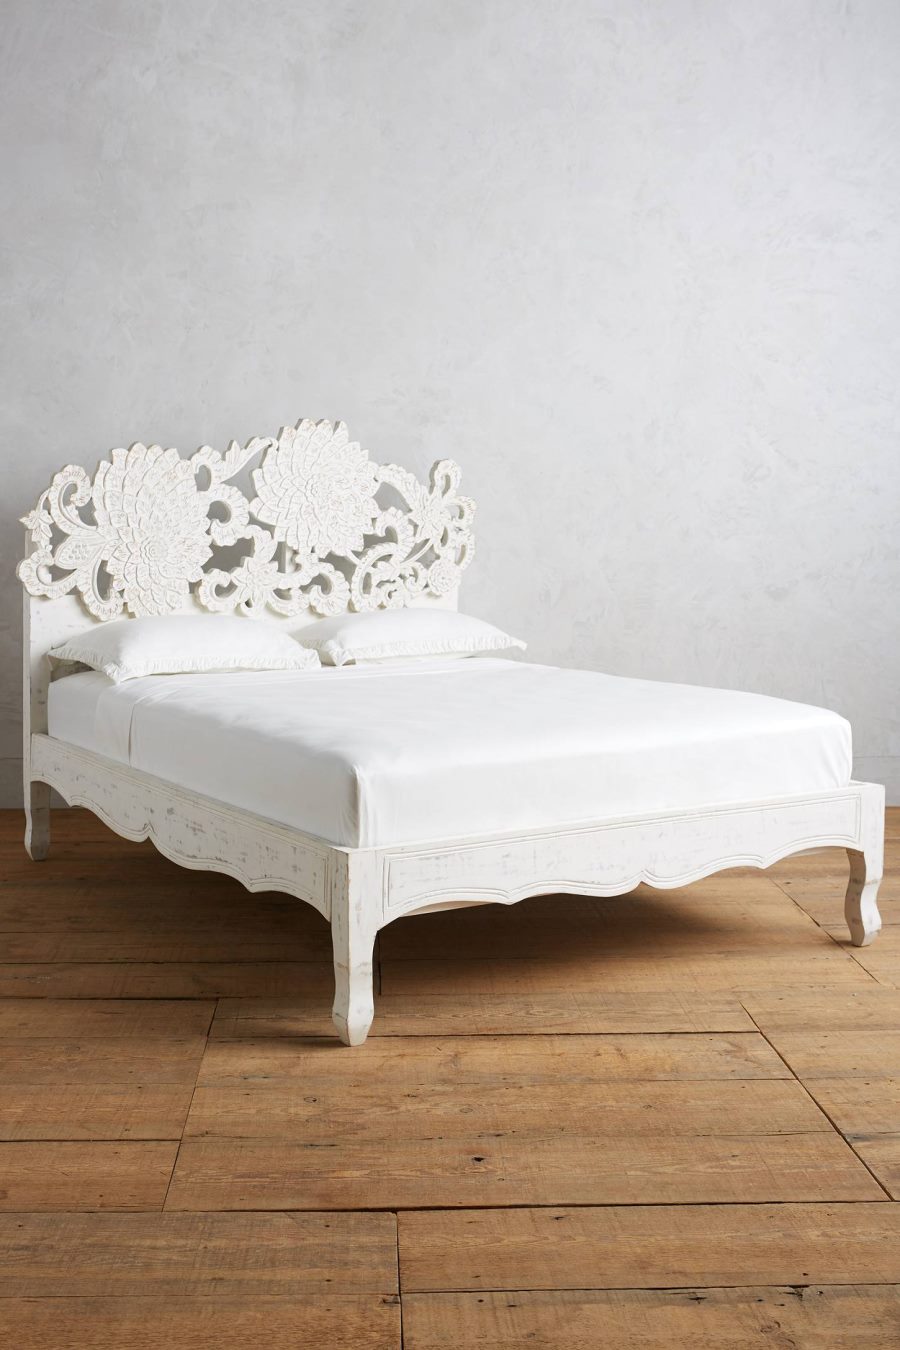 Lovely handcarved bed from Anthropologie